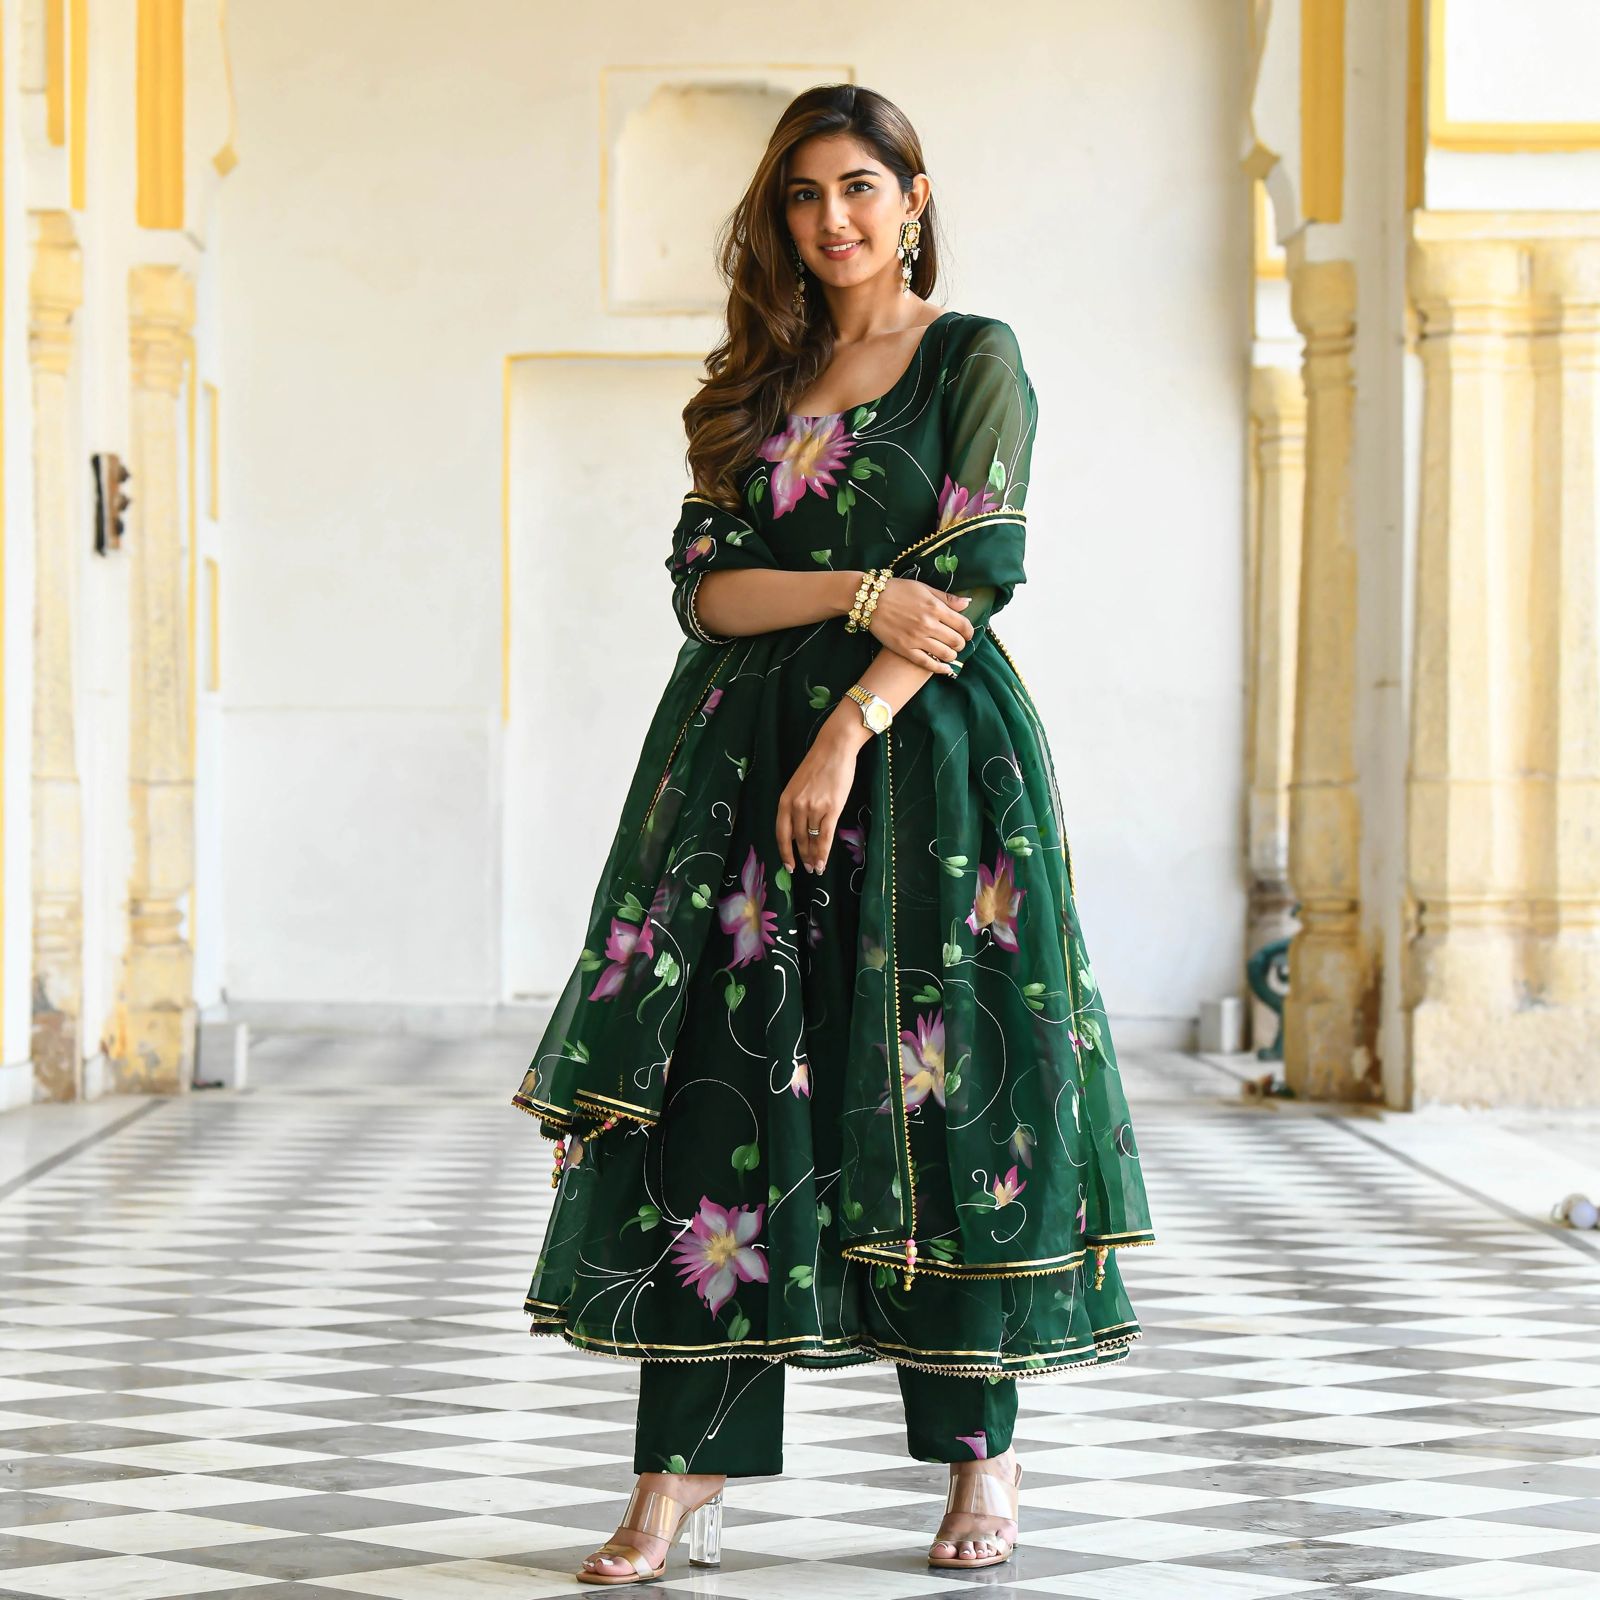 Dark Green Printed Organza Suit is a Work of Art, Featuring a